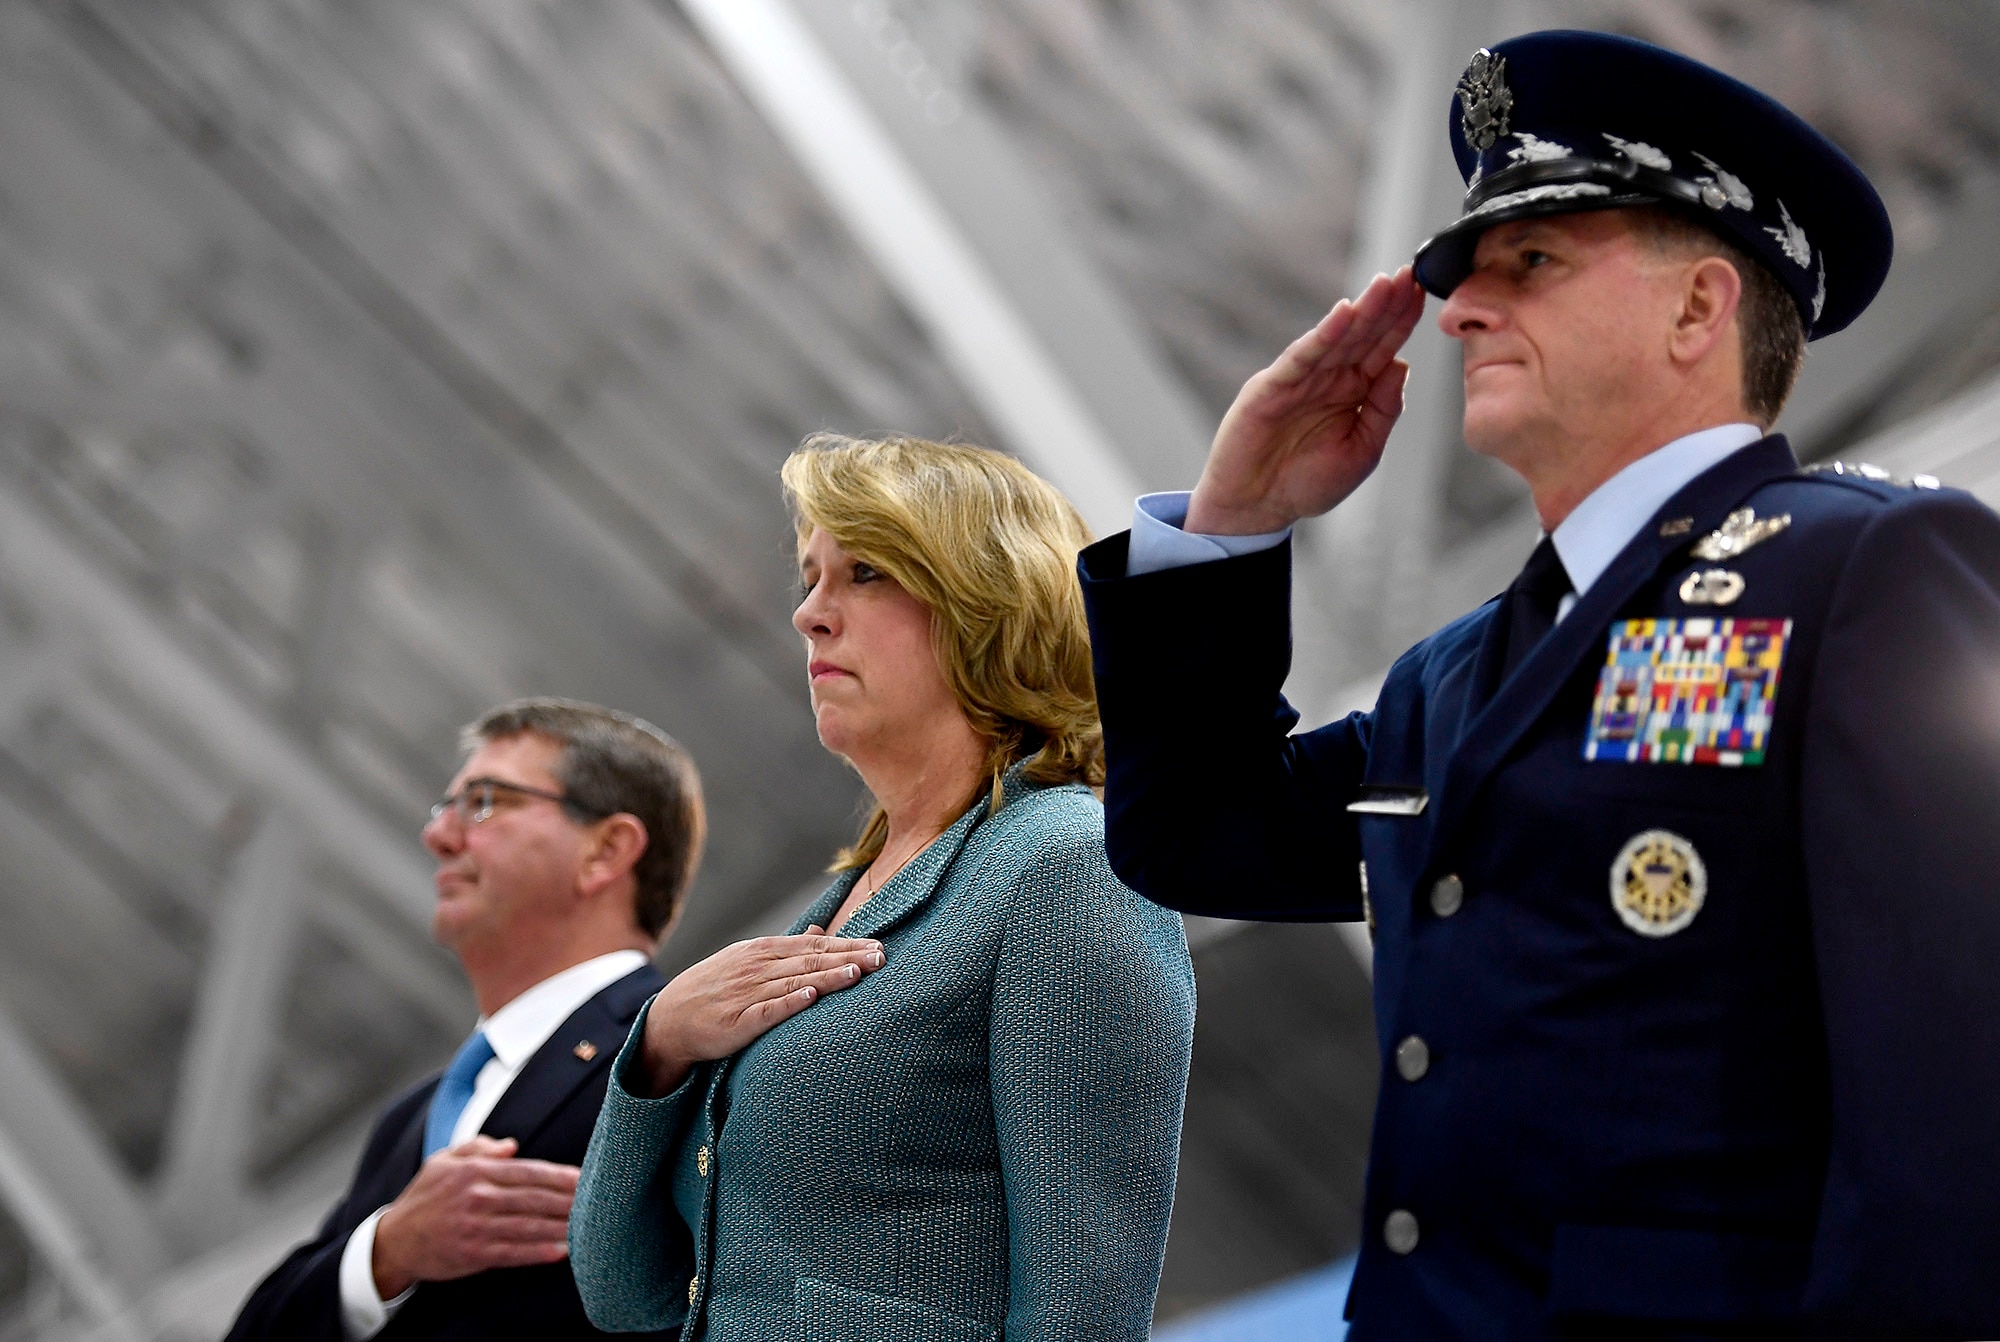 Secretary of the Air Force Deborah Lee James stands for the national anthem with Air Force Chief of Staff Gen. David L. Goldfein and Secretary of Defense Ash Carter, during her farewell ceremony at Joint Base Andrews, Md., Jan. 11, 2017.  James took office as the 23rd secretary of the Air Force in December 2013. (U.S. Air Force photo/Scott M. Ash)